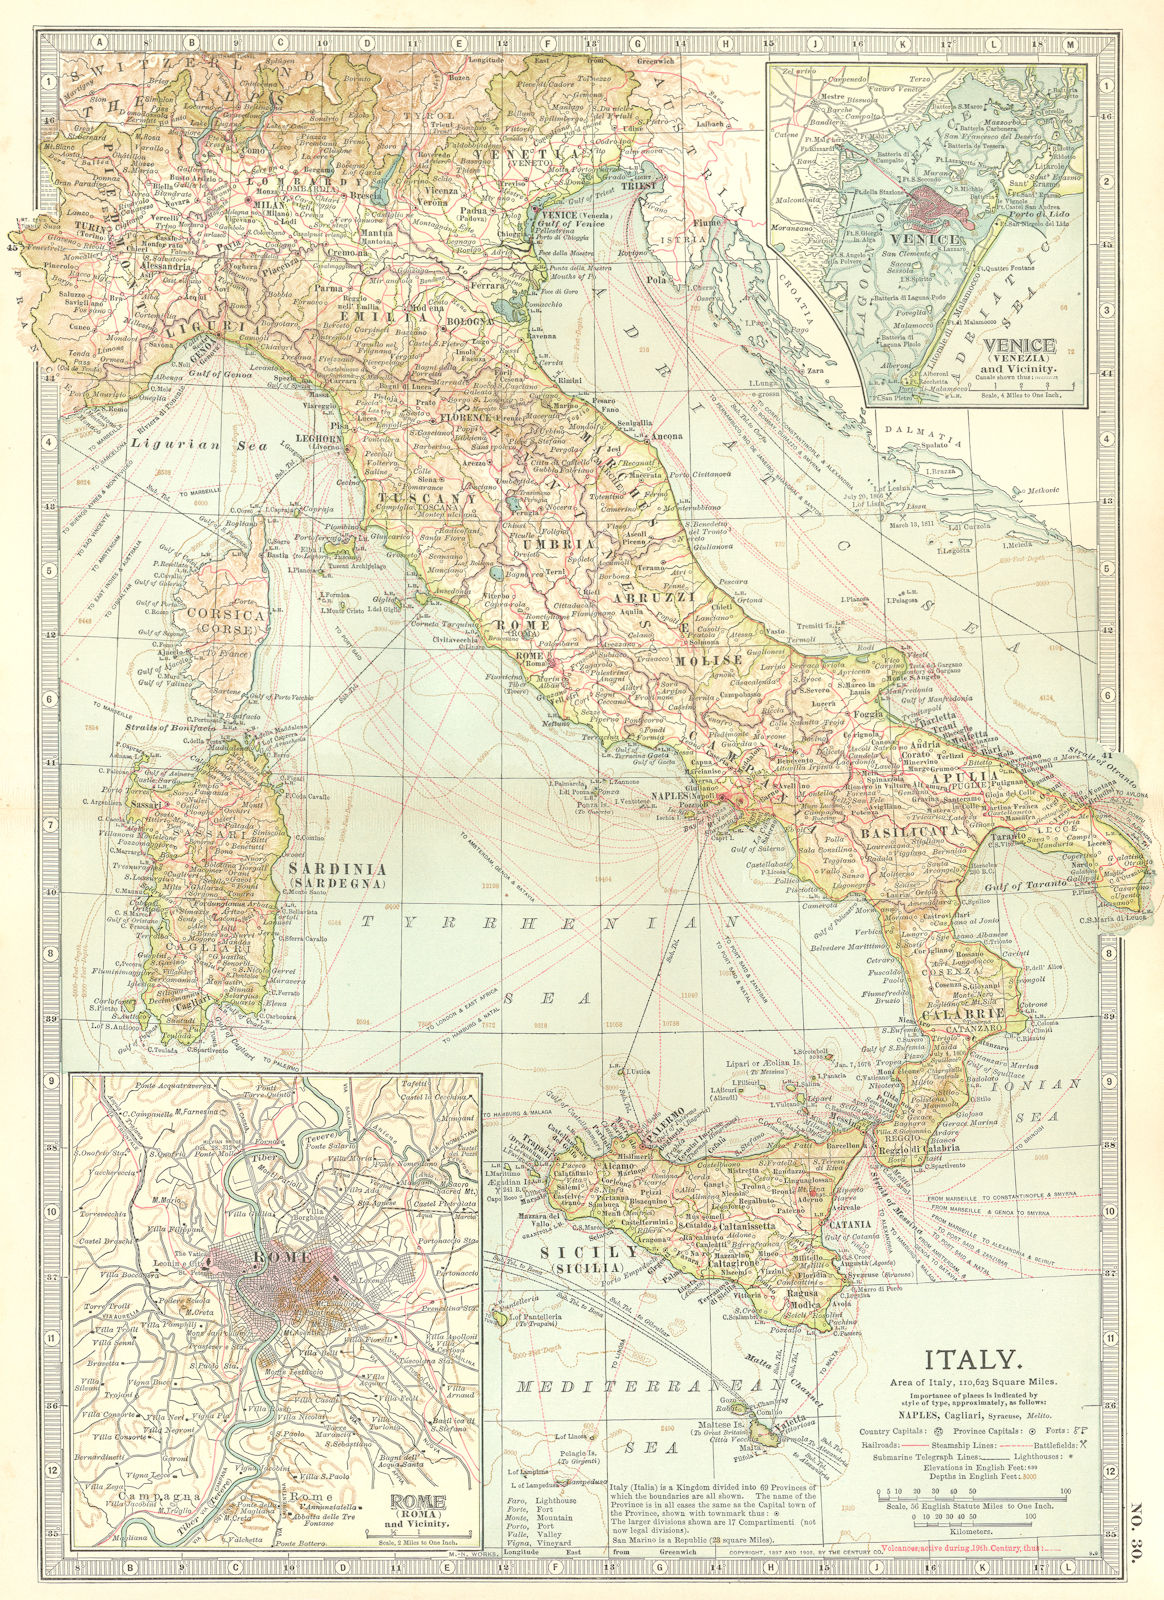 Associate Product ITALY. Rome Venice.Shows key naval battles/dates 1811 1866 1676 241BC 1903 map